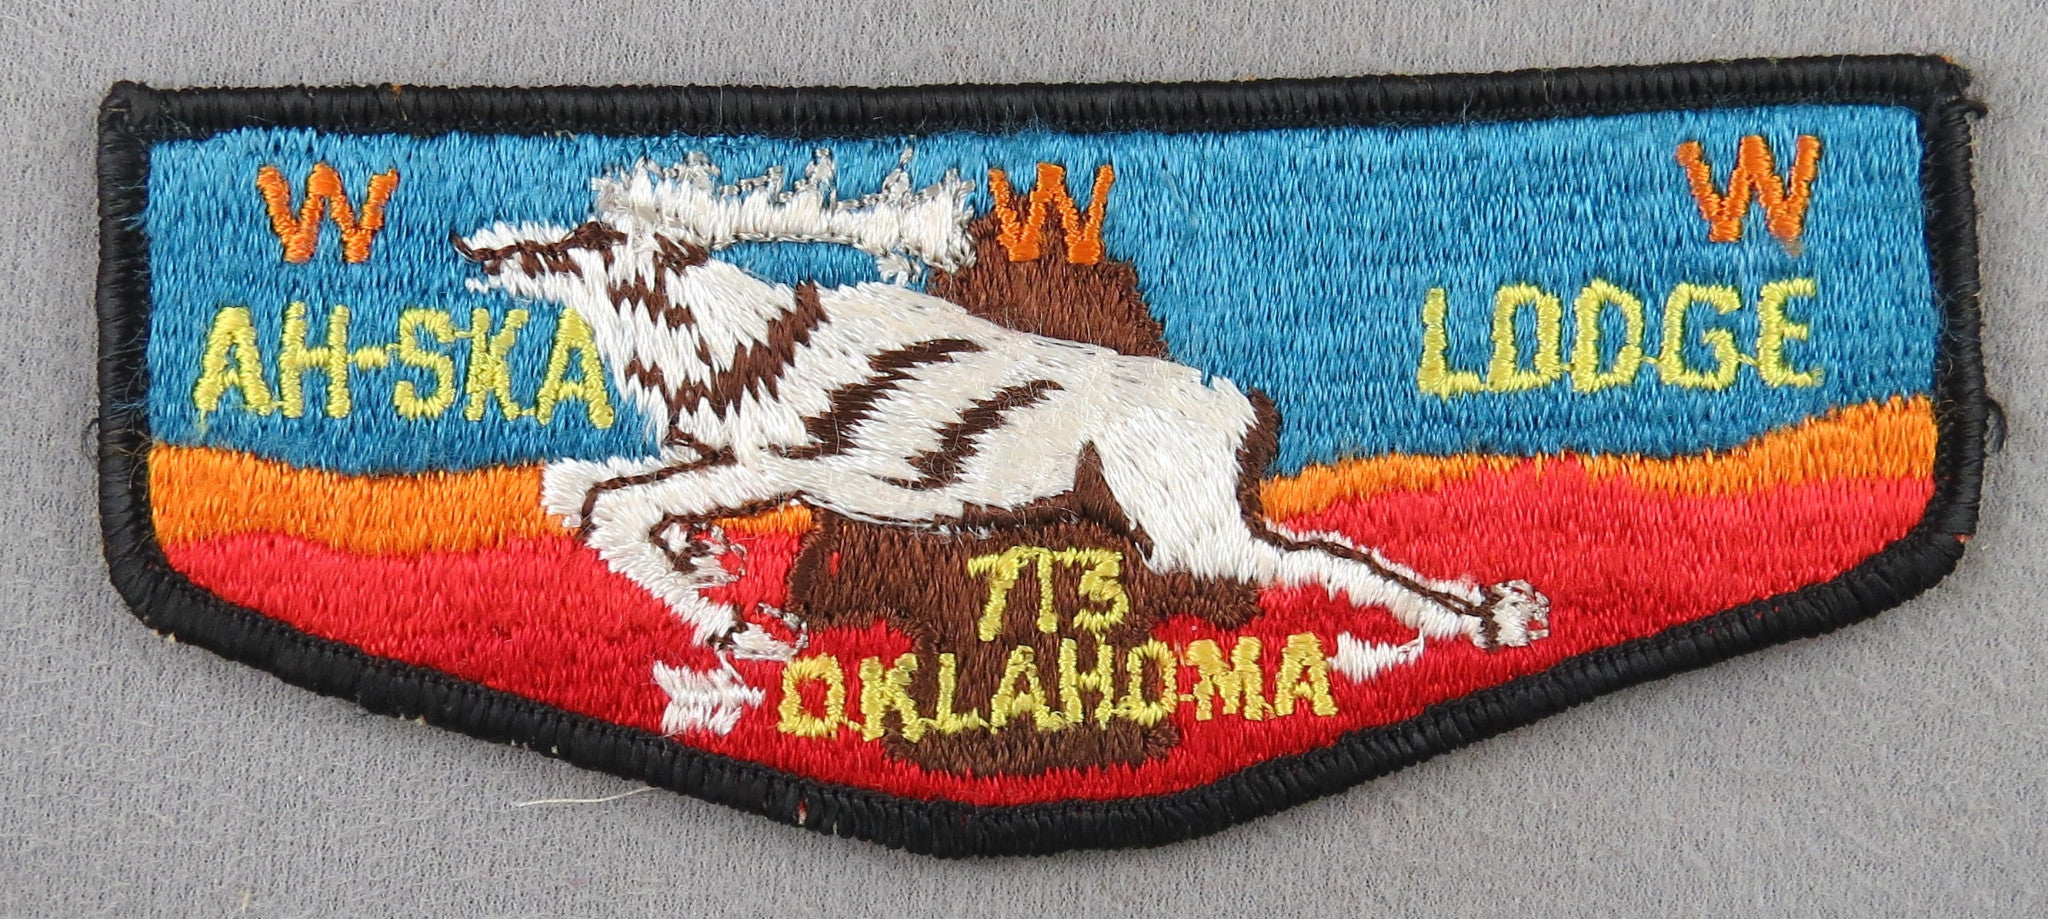 OA Ah-Ska Lodge 213 S1a First Flap Rated # 6 Issued 1969 OK Dave Thoma |  smart-scout-patches